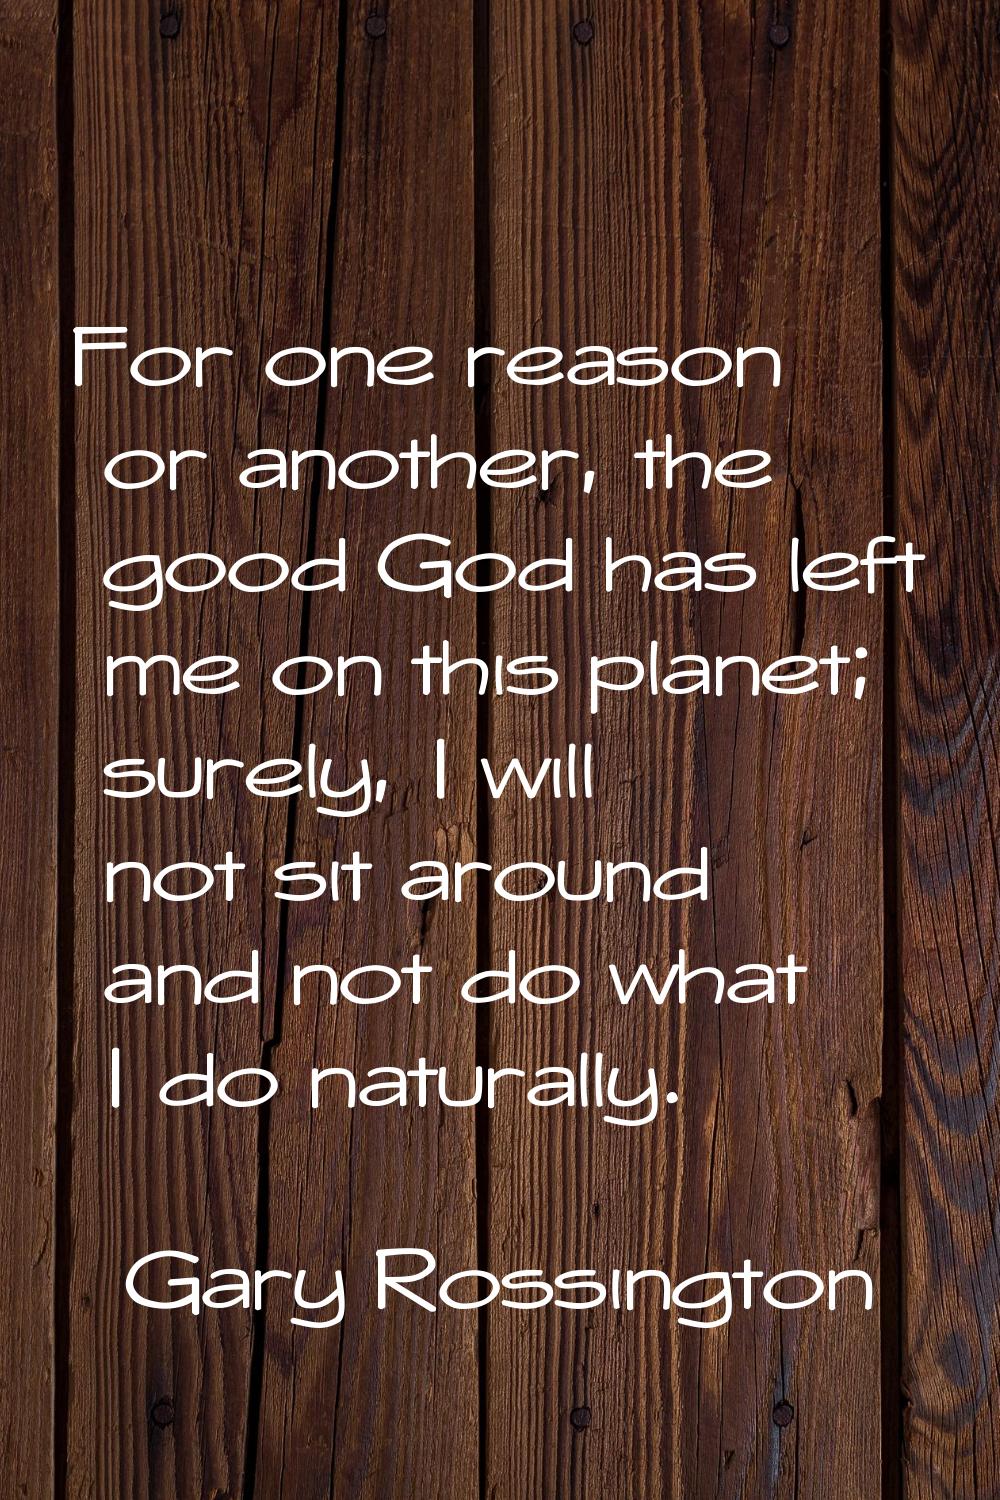 For one reason or another, the good God has left me on this planet; surely, I will not sit around a